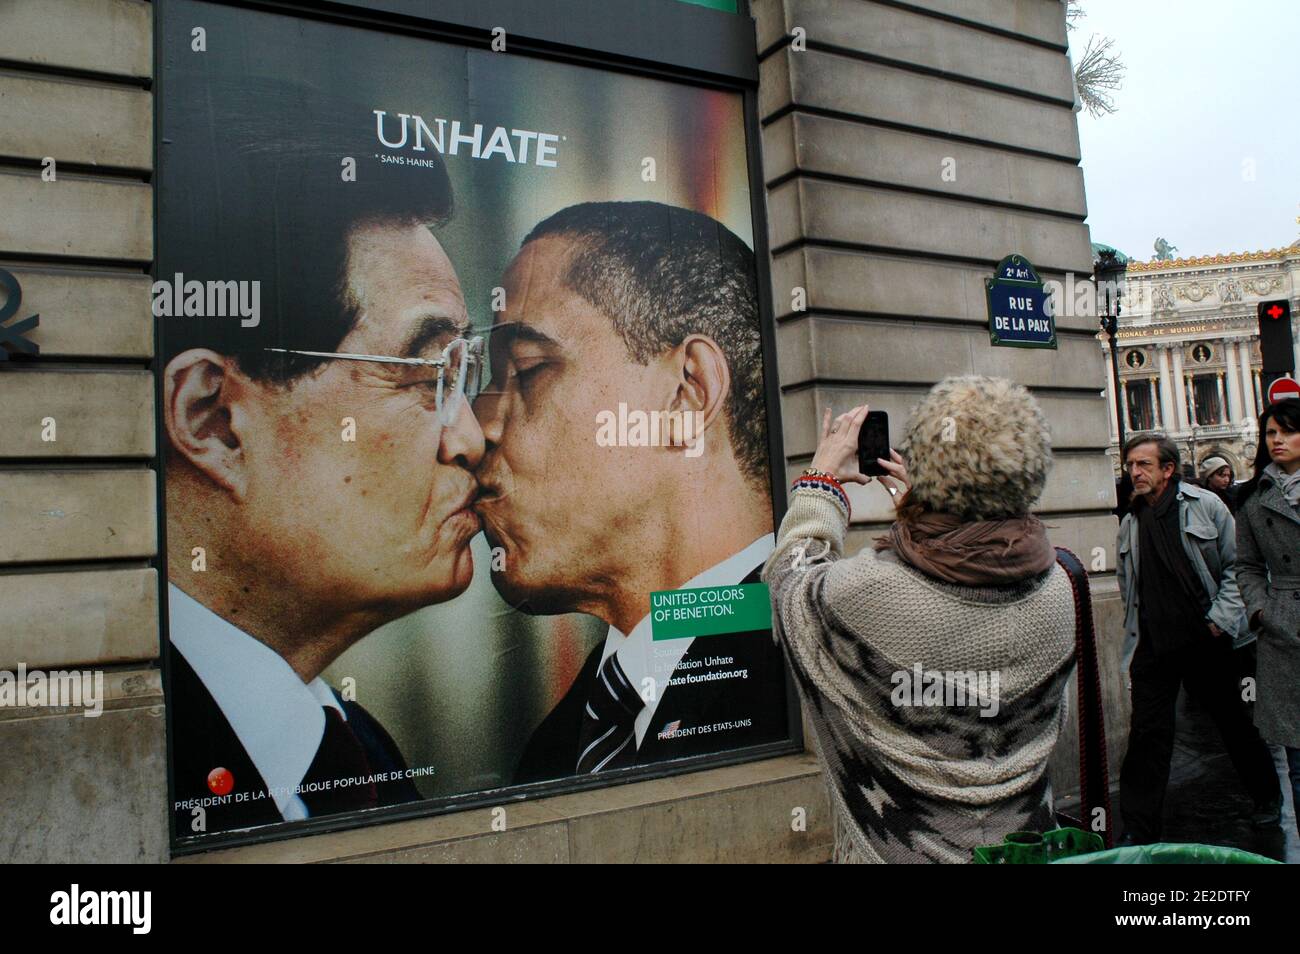 Posters from new Benetton's ad campaign 'Unhate' are on display on it's  flagship store windows, Place de l'Opera in Paris, France, November 17,  2011. They show various pictures of political opponents kissing.